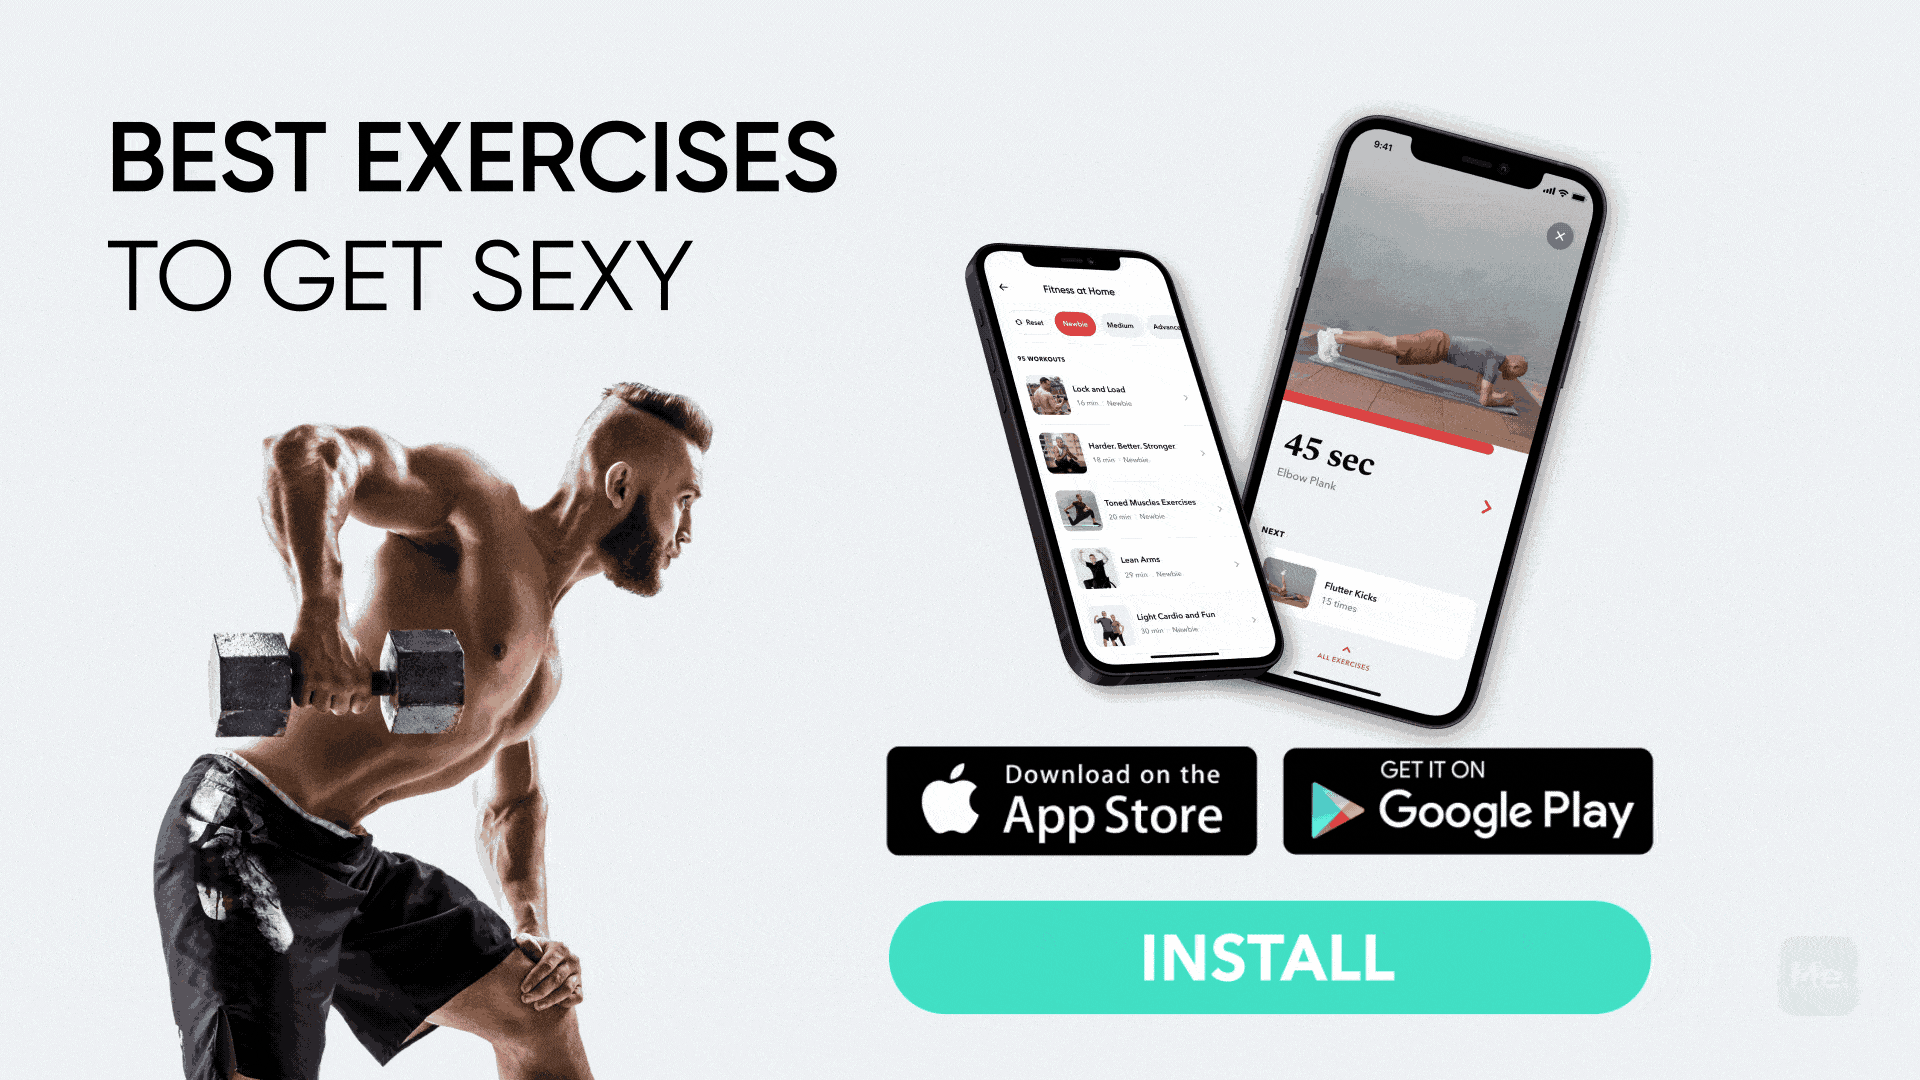 Best exercises to get sexy